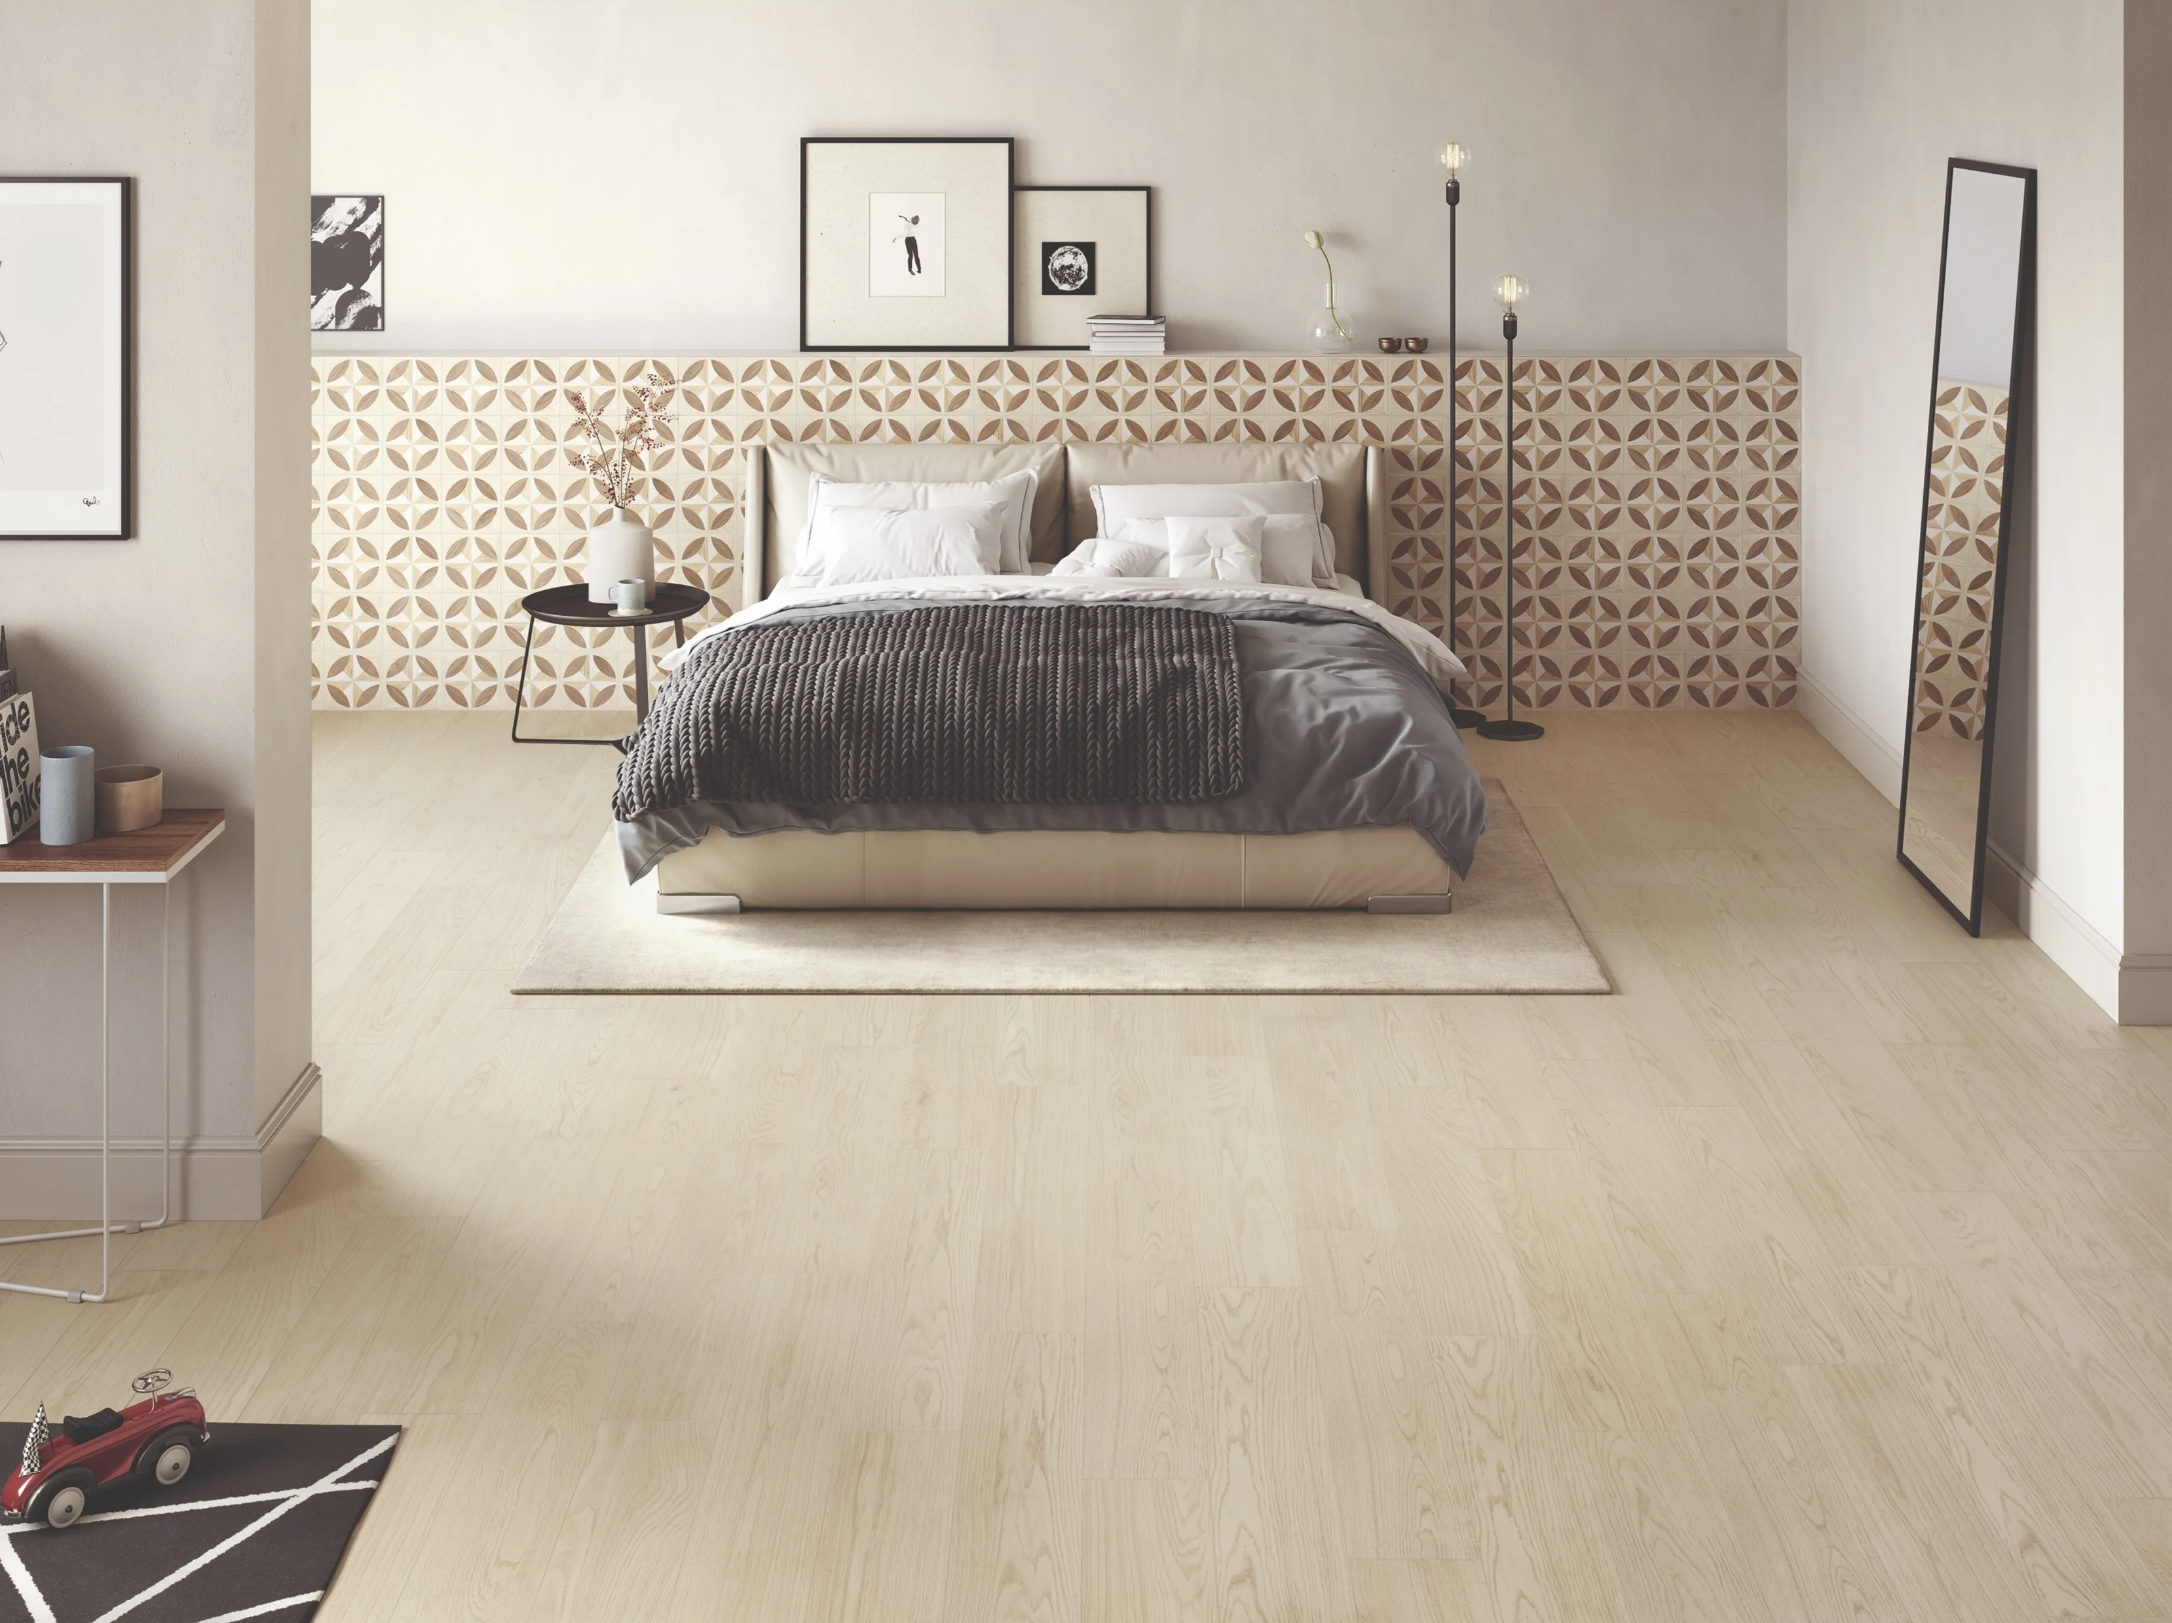 Dimore R9 series Natural porcelain tile floor by Emilceramica Group 20x120 1st Choice
